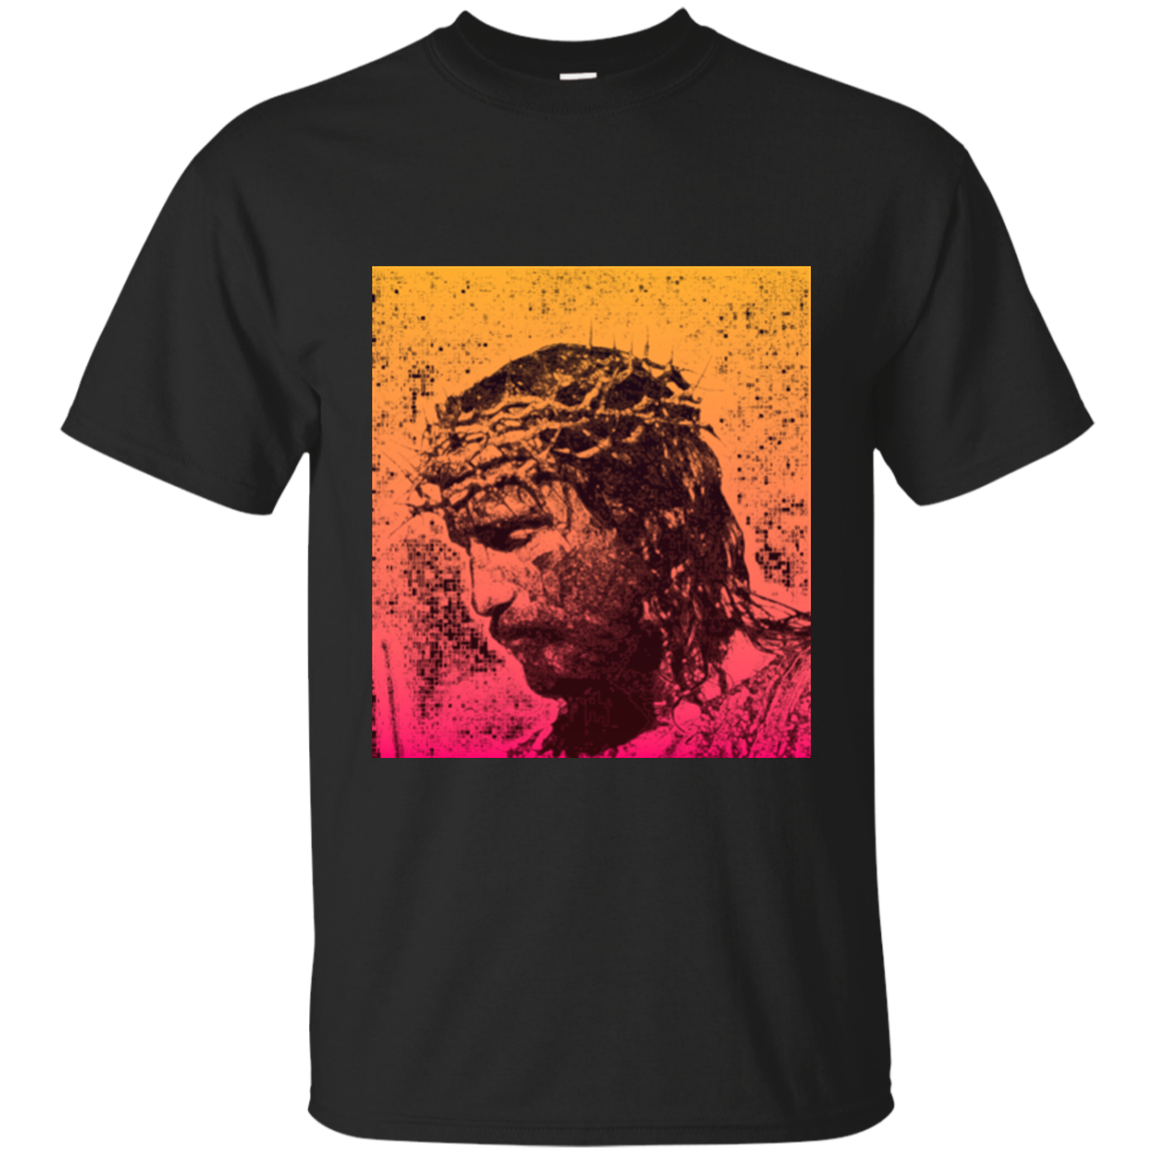 PASSION OF THE CHRIST  T-SHIRT